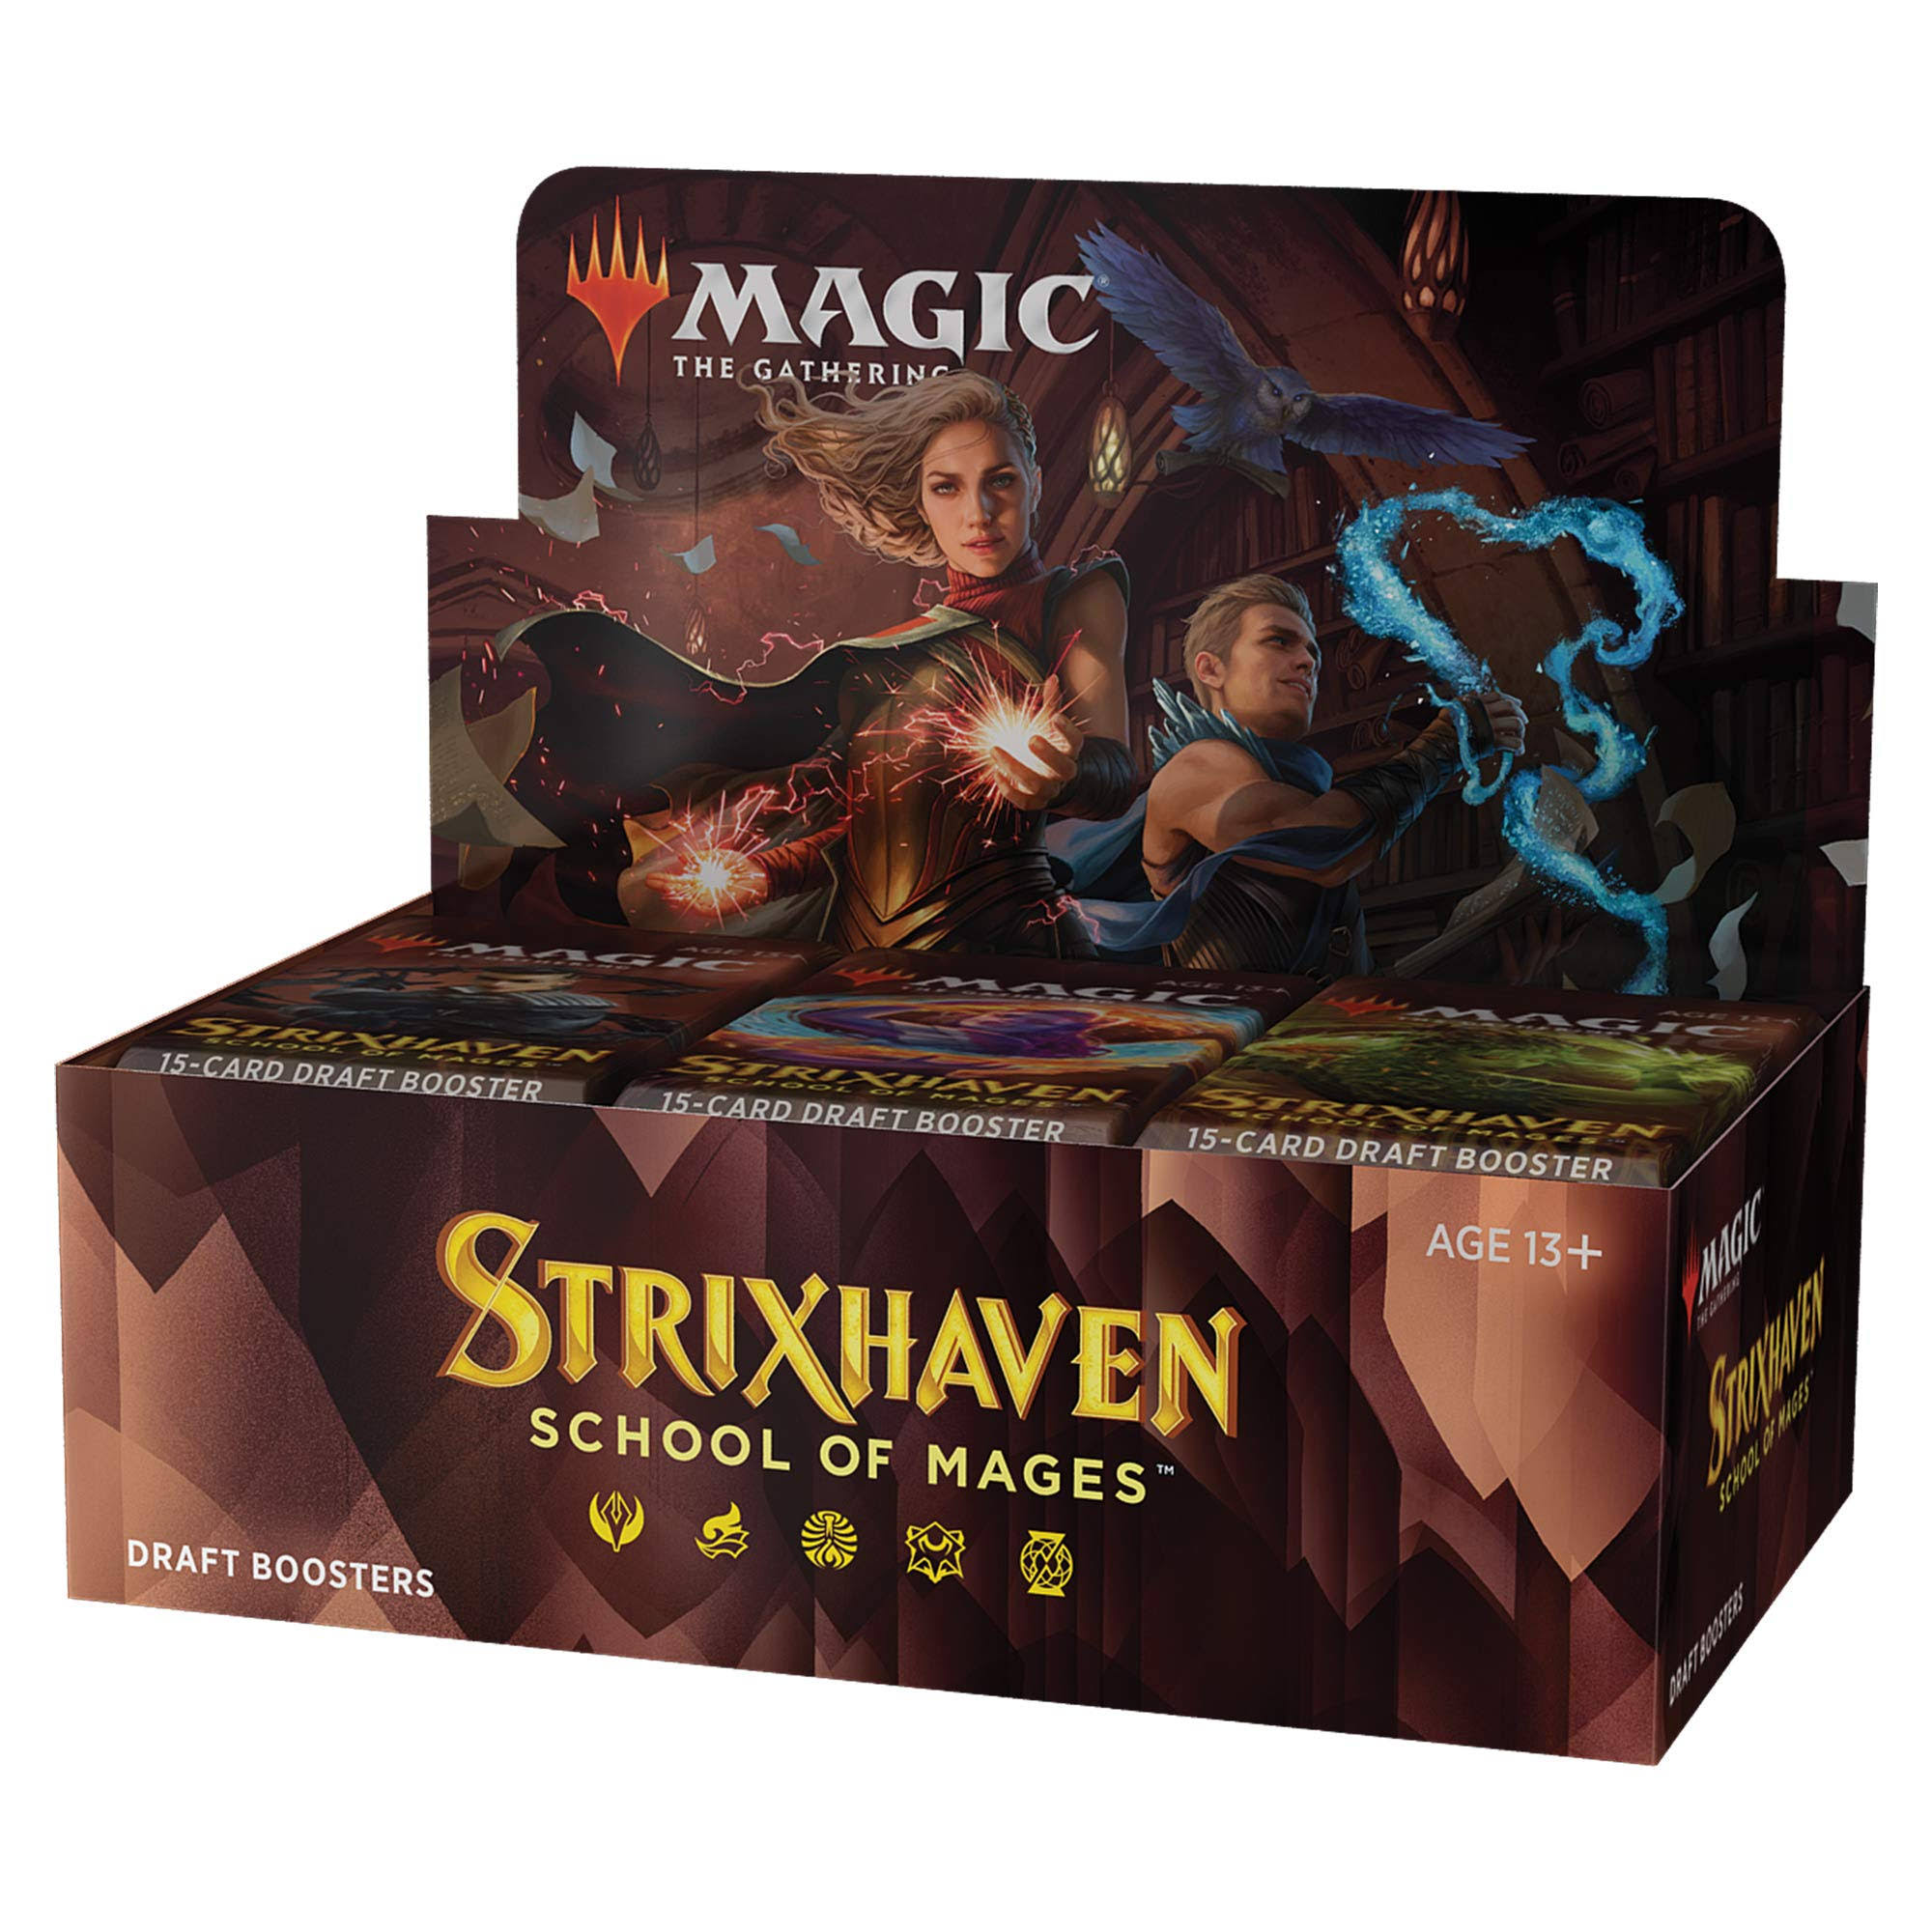 Magic The Gathering Strixhaven - School of Mages Draft Booster Box